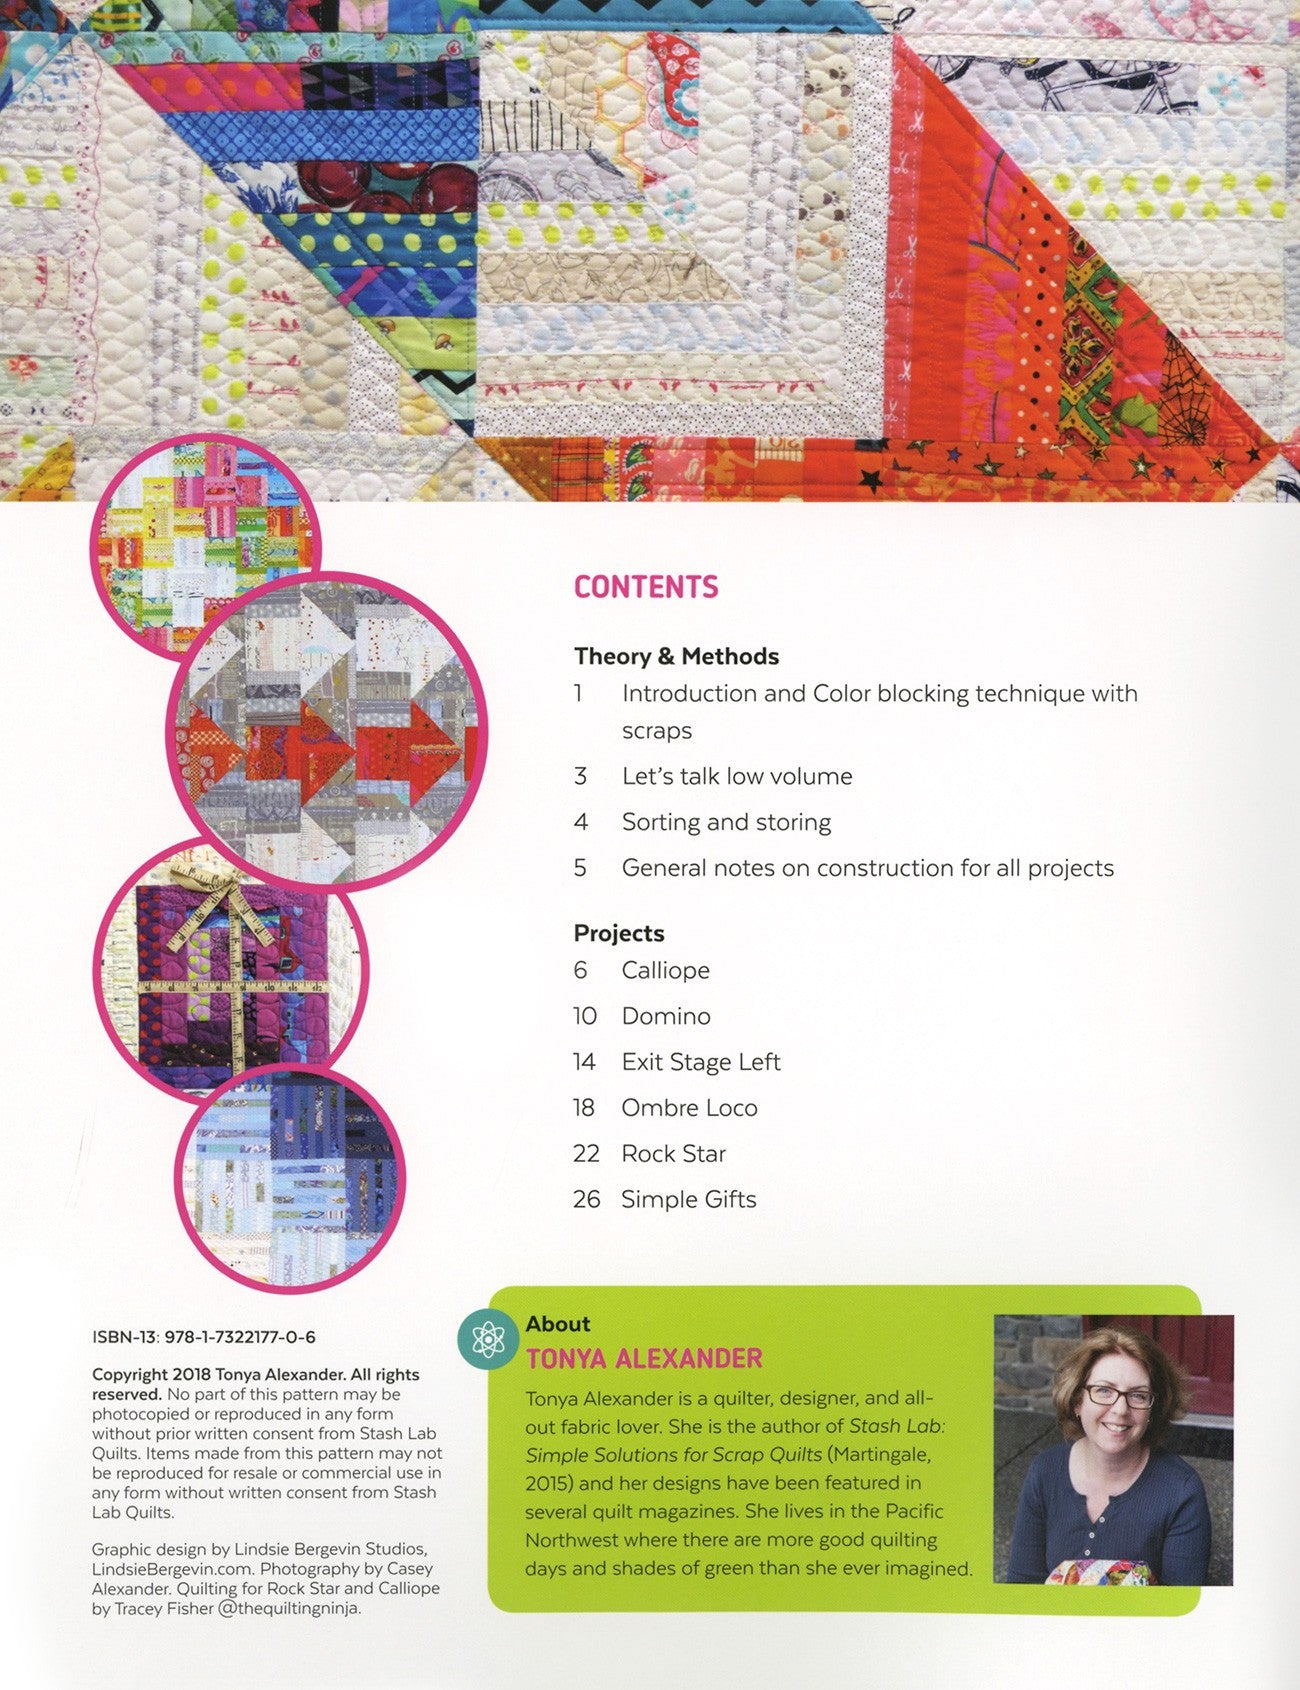 String Theory Lab Manual Quilt Pattern Book by Tonya Alexander of Stash Lab Quilts